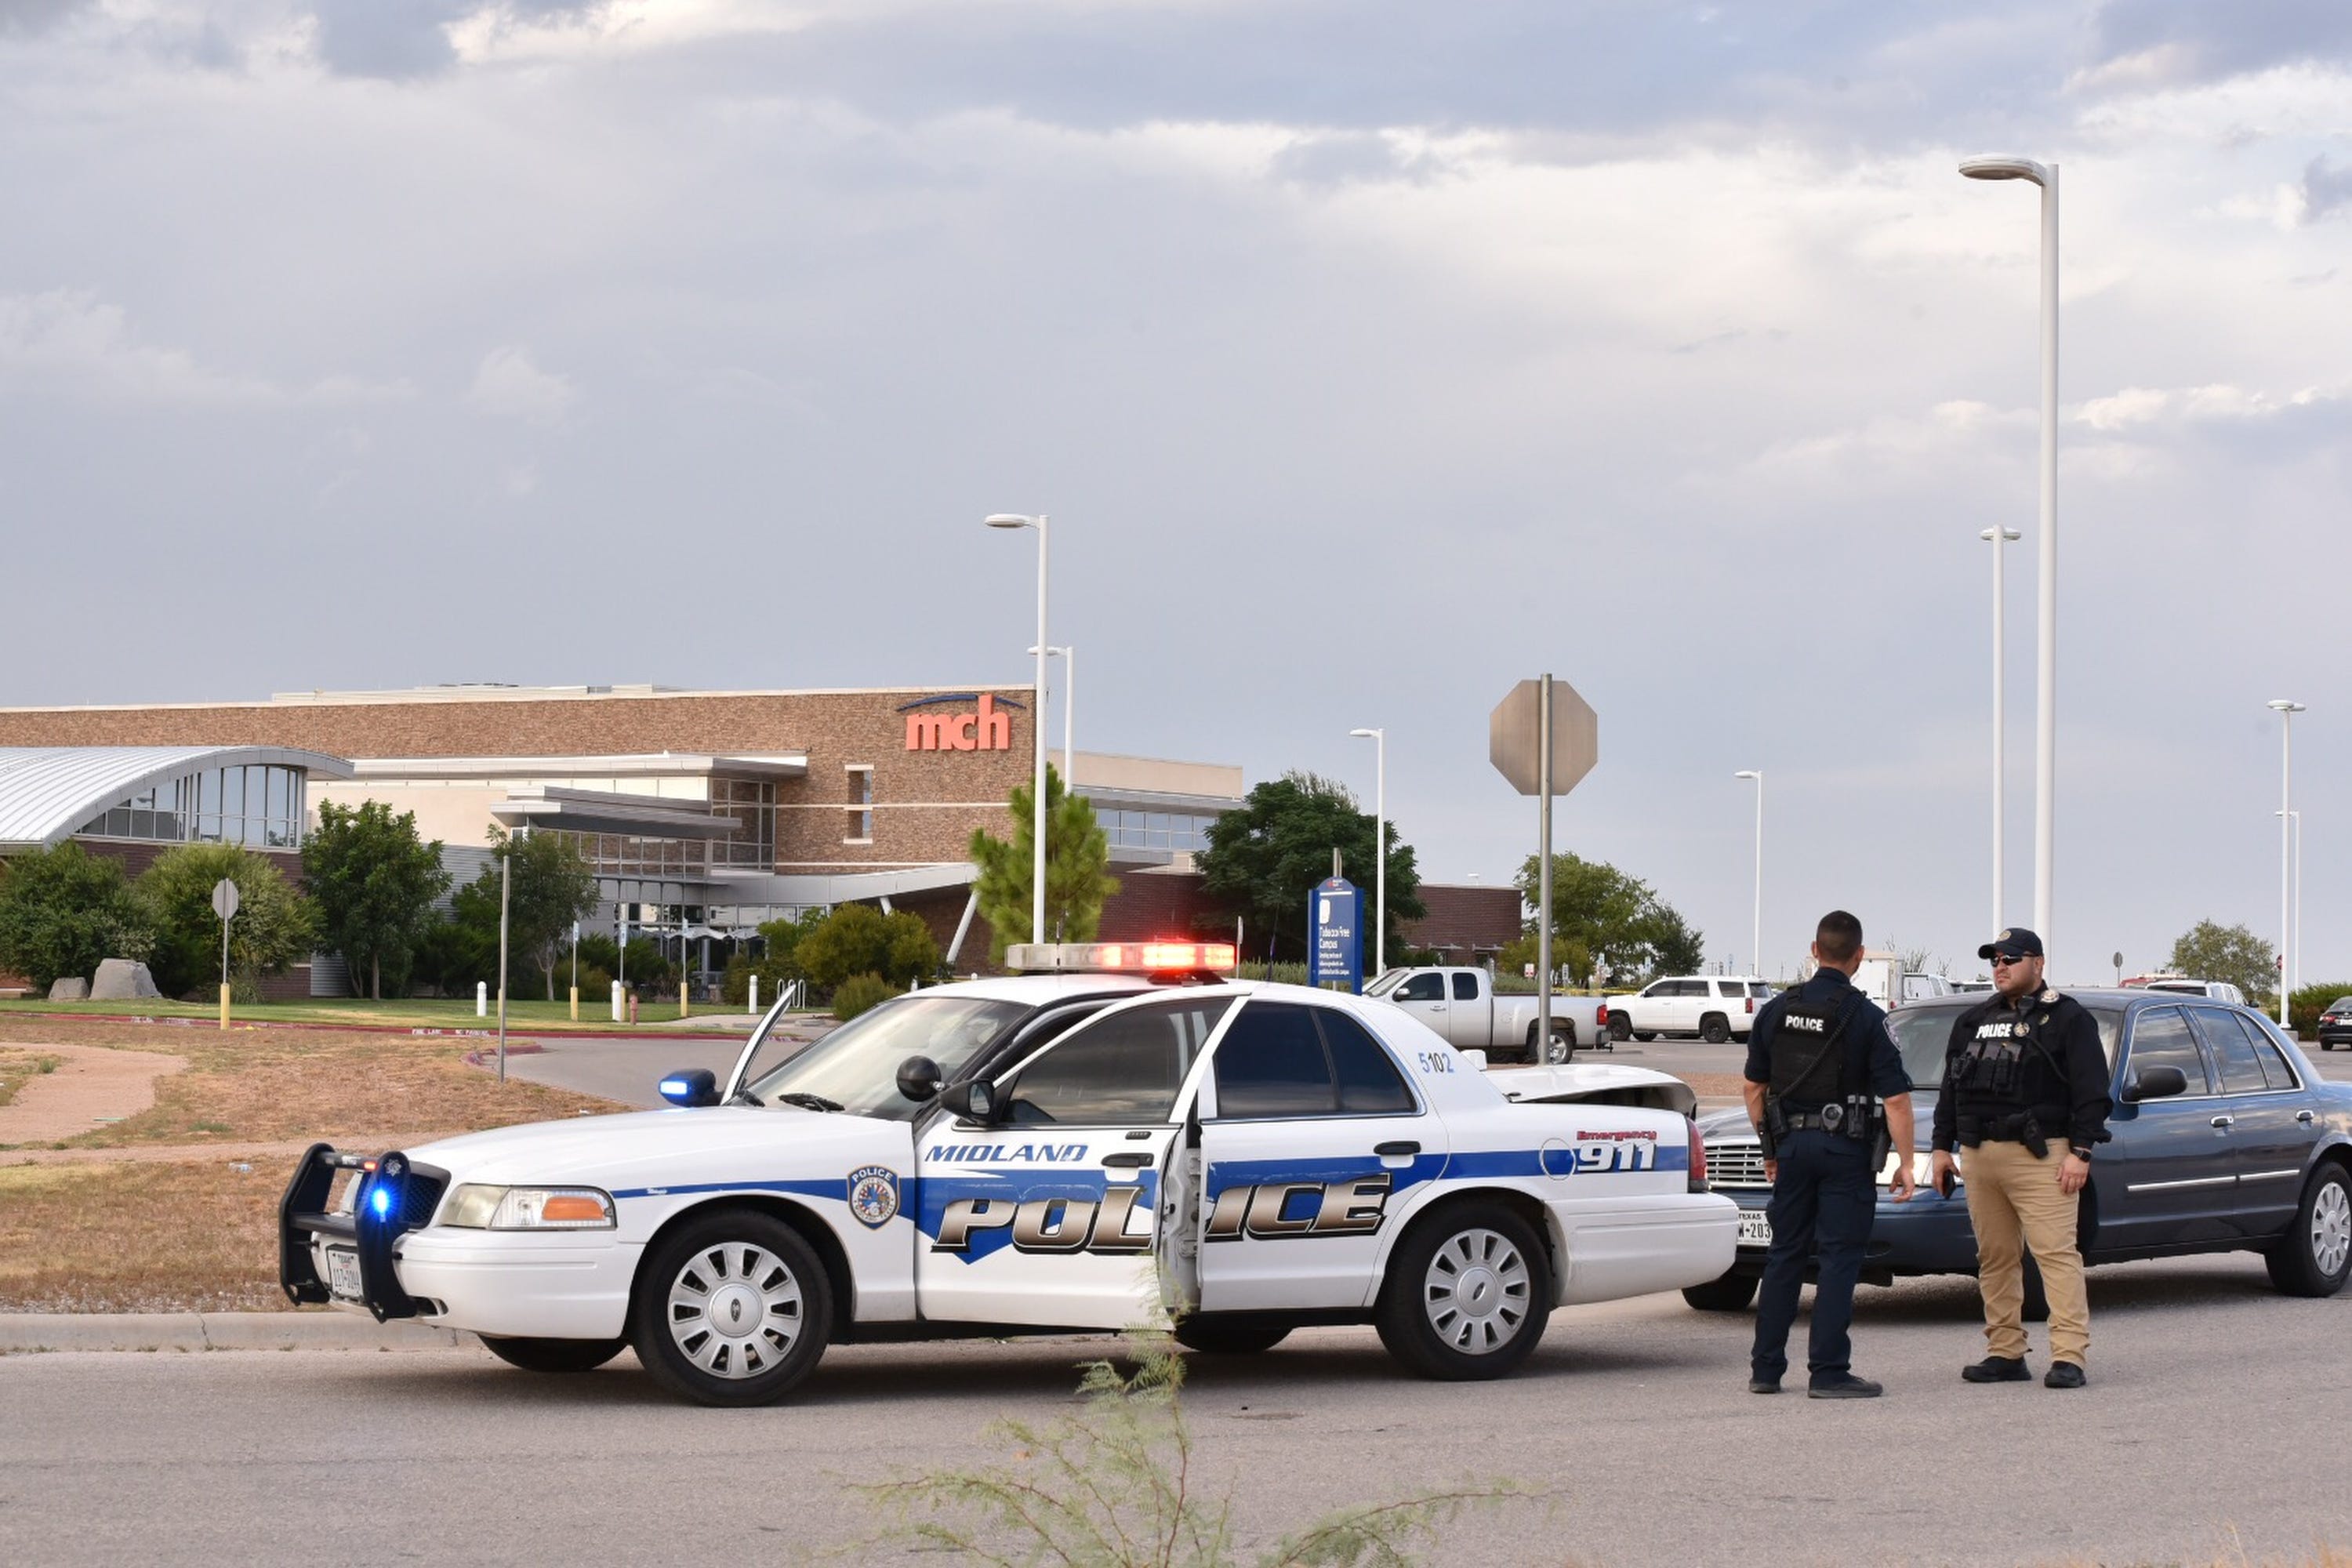 7 Dead In Mass Shooting In Midland Odessa Texas - 